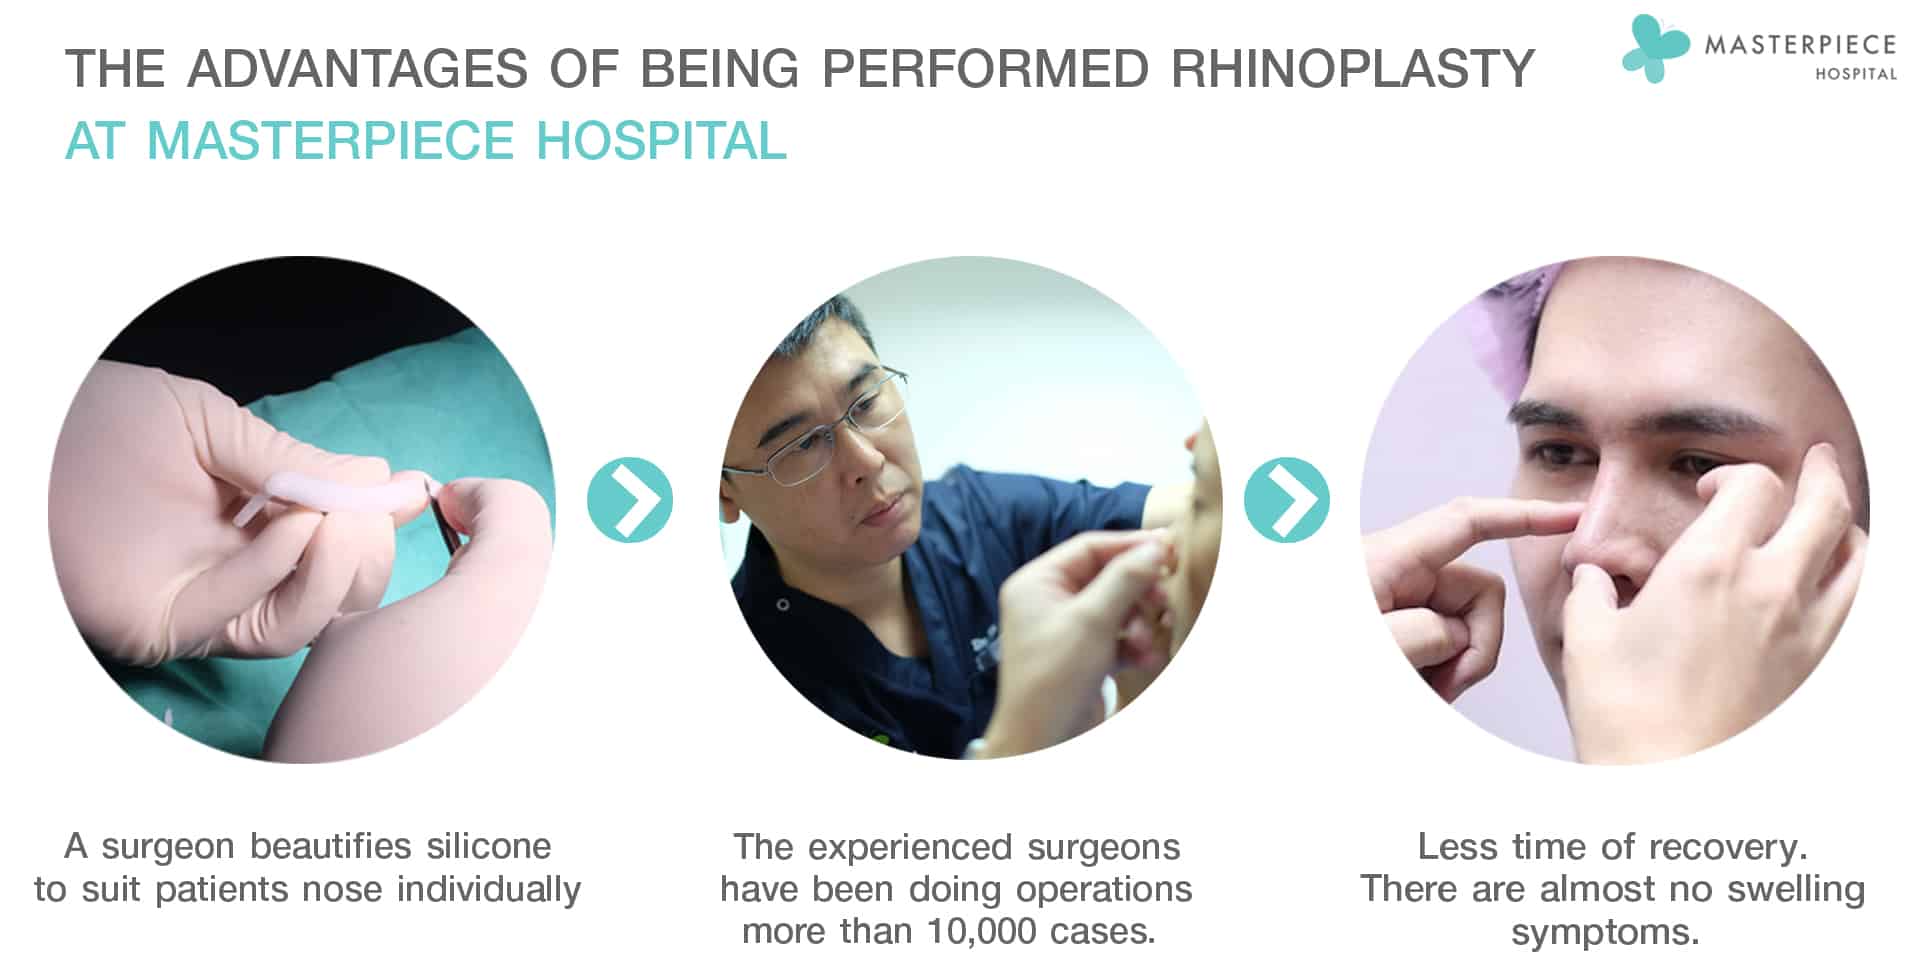 The advantages of being performed rhinoplasty at Masterpiece Hospital